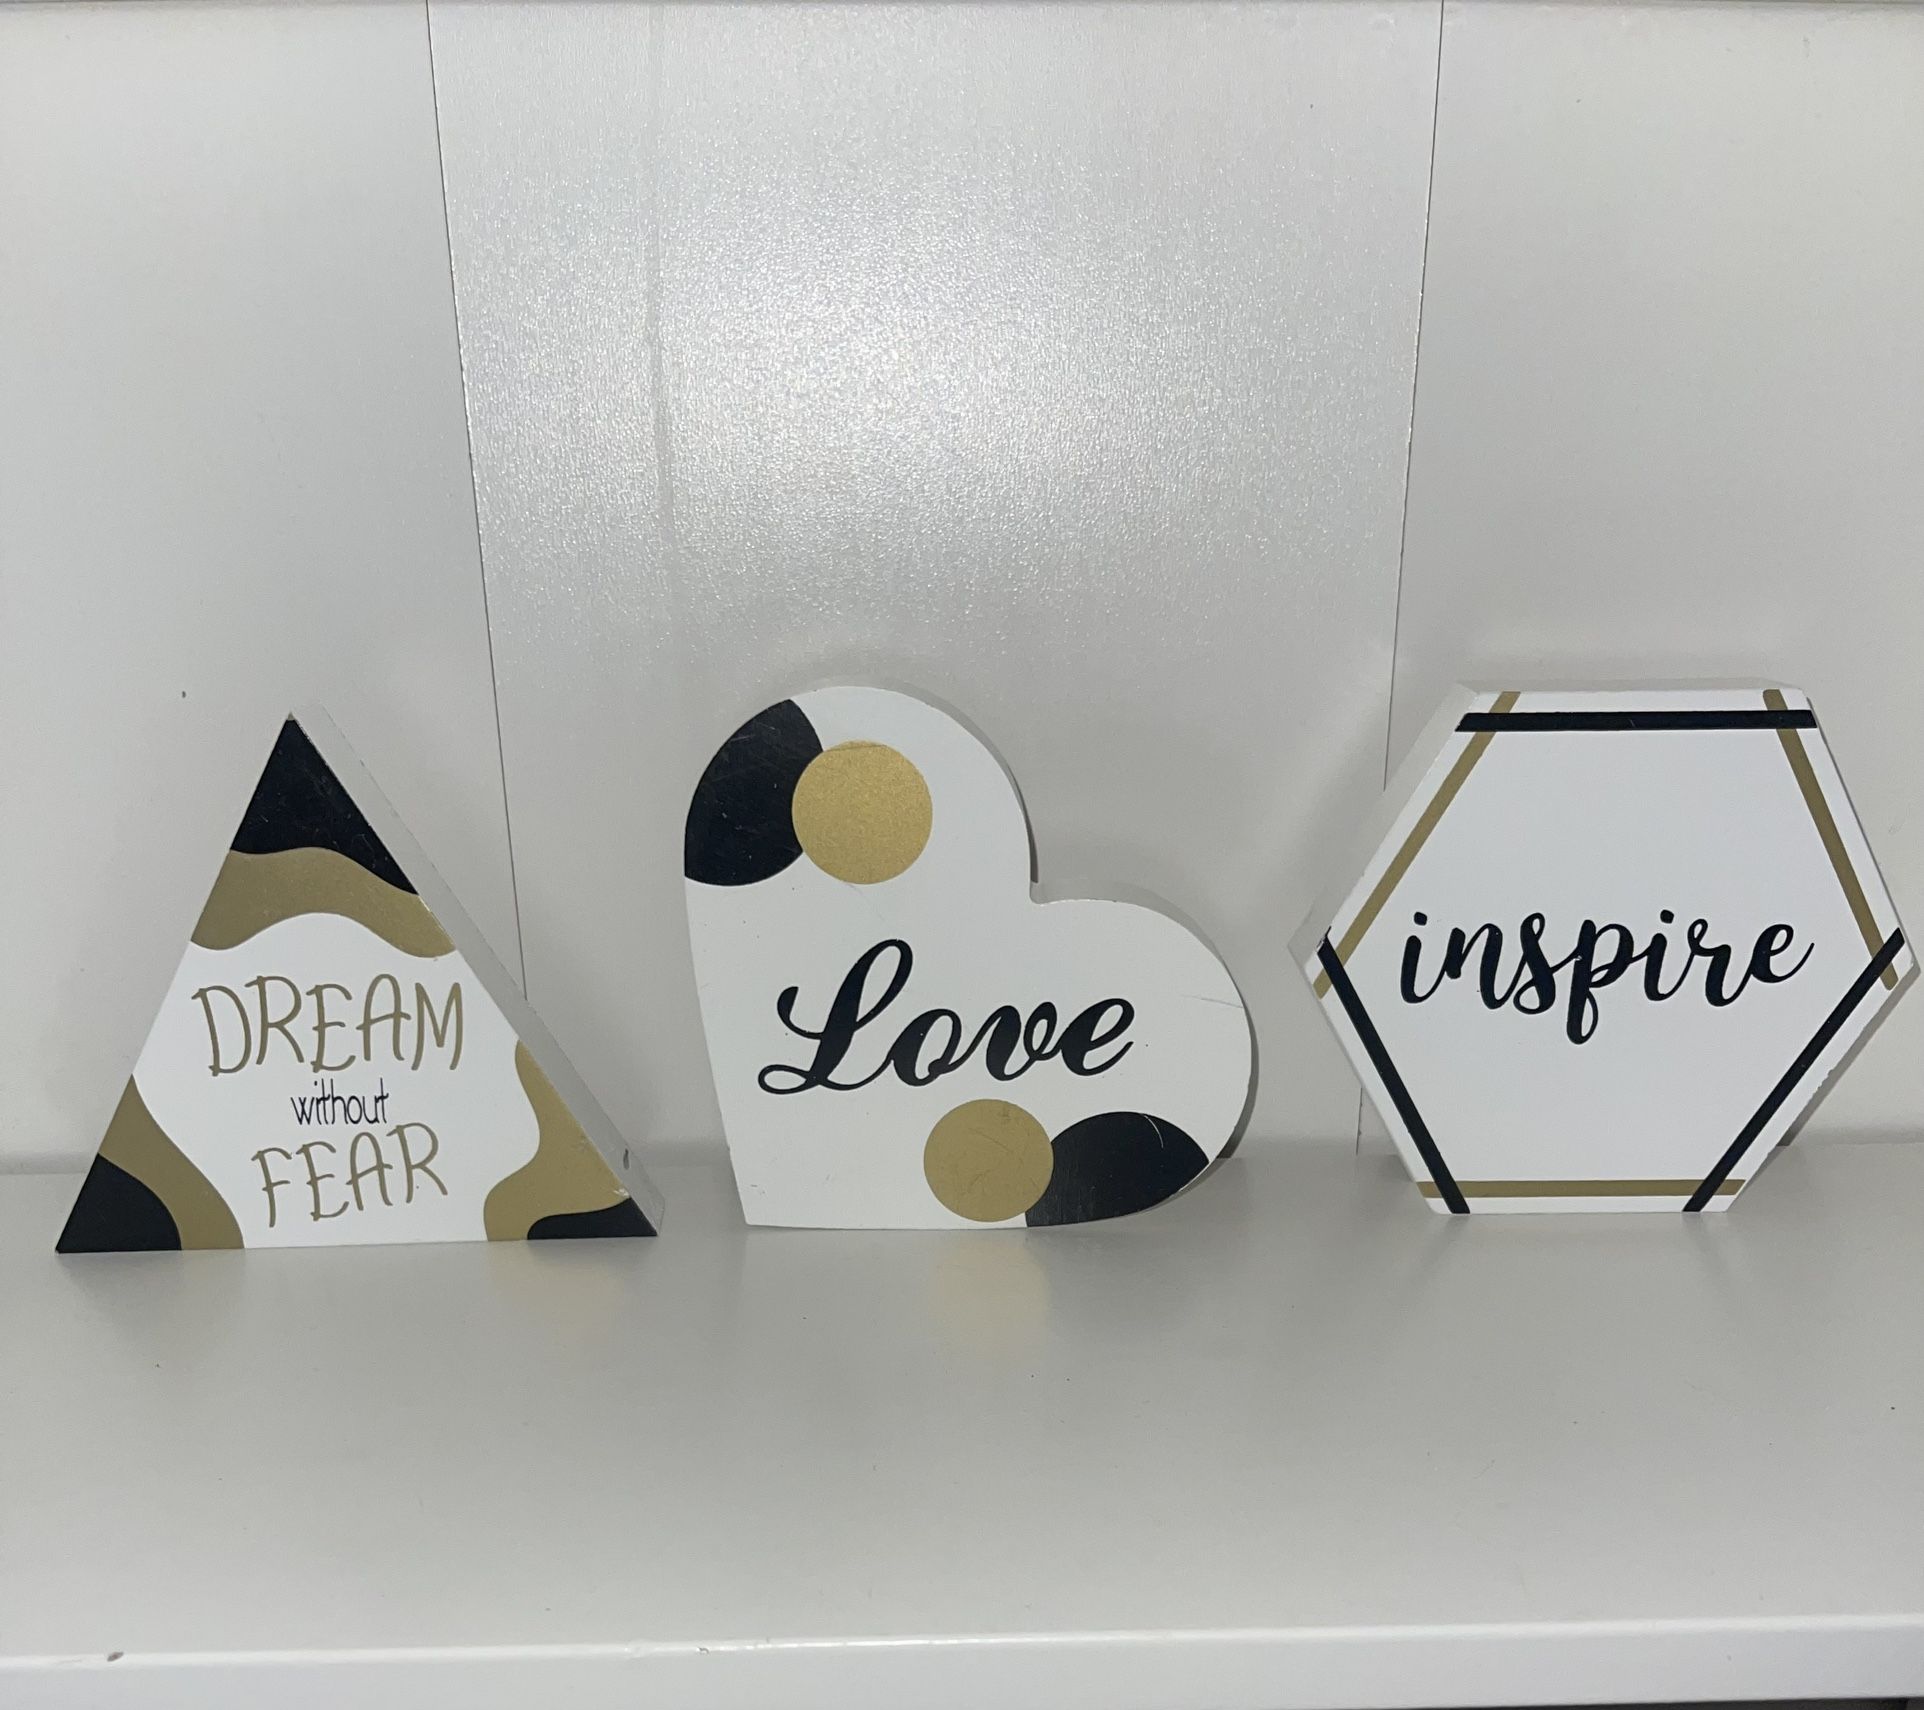 Inspirational "Inspire" “DreamWithout Fear” “Love” Home, Wedding, Birthday Decor